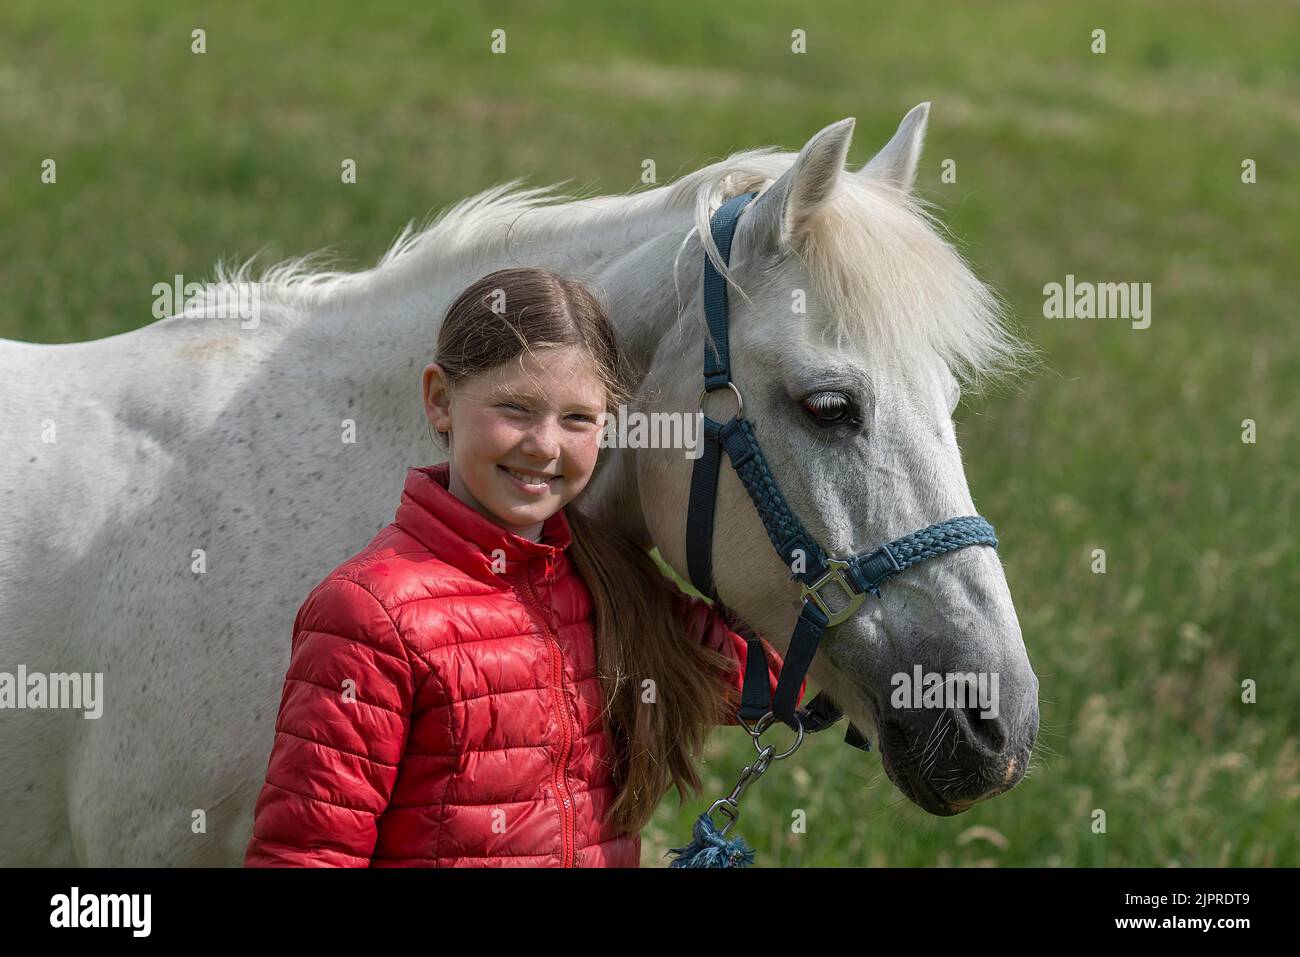 Girl, 10 years, with her horse in the pasture, Mecklenburg-Western Pomerania, Germany Stock Photo